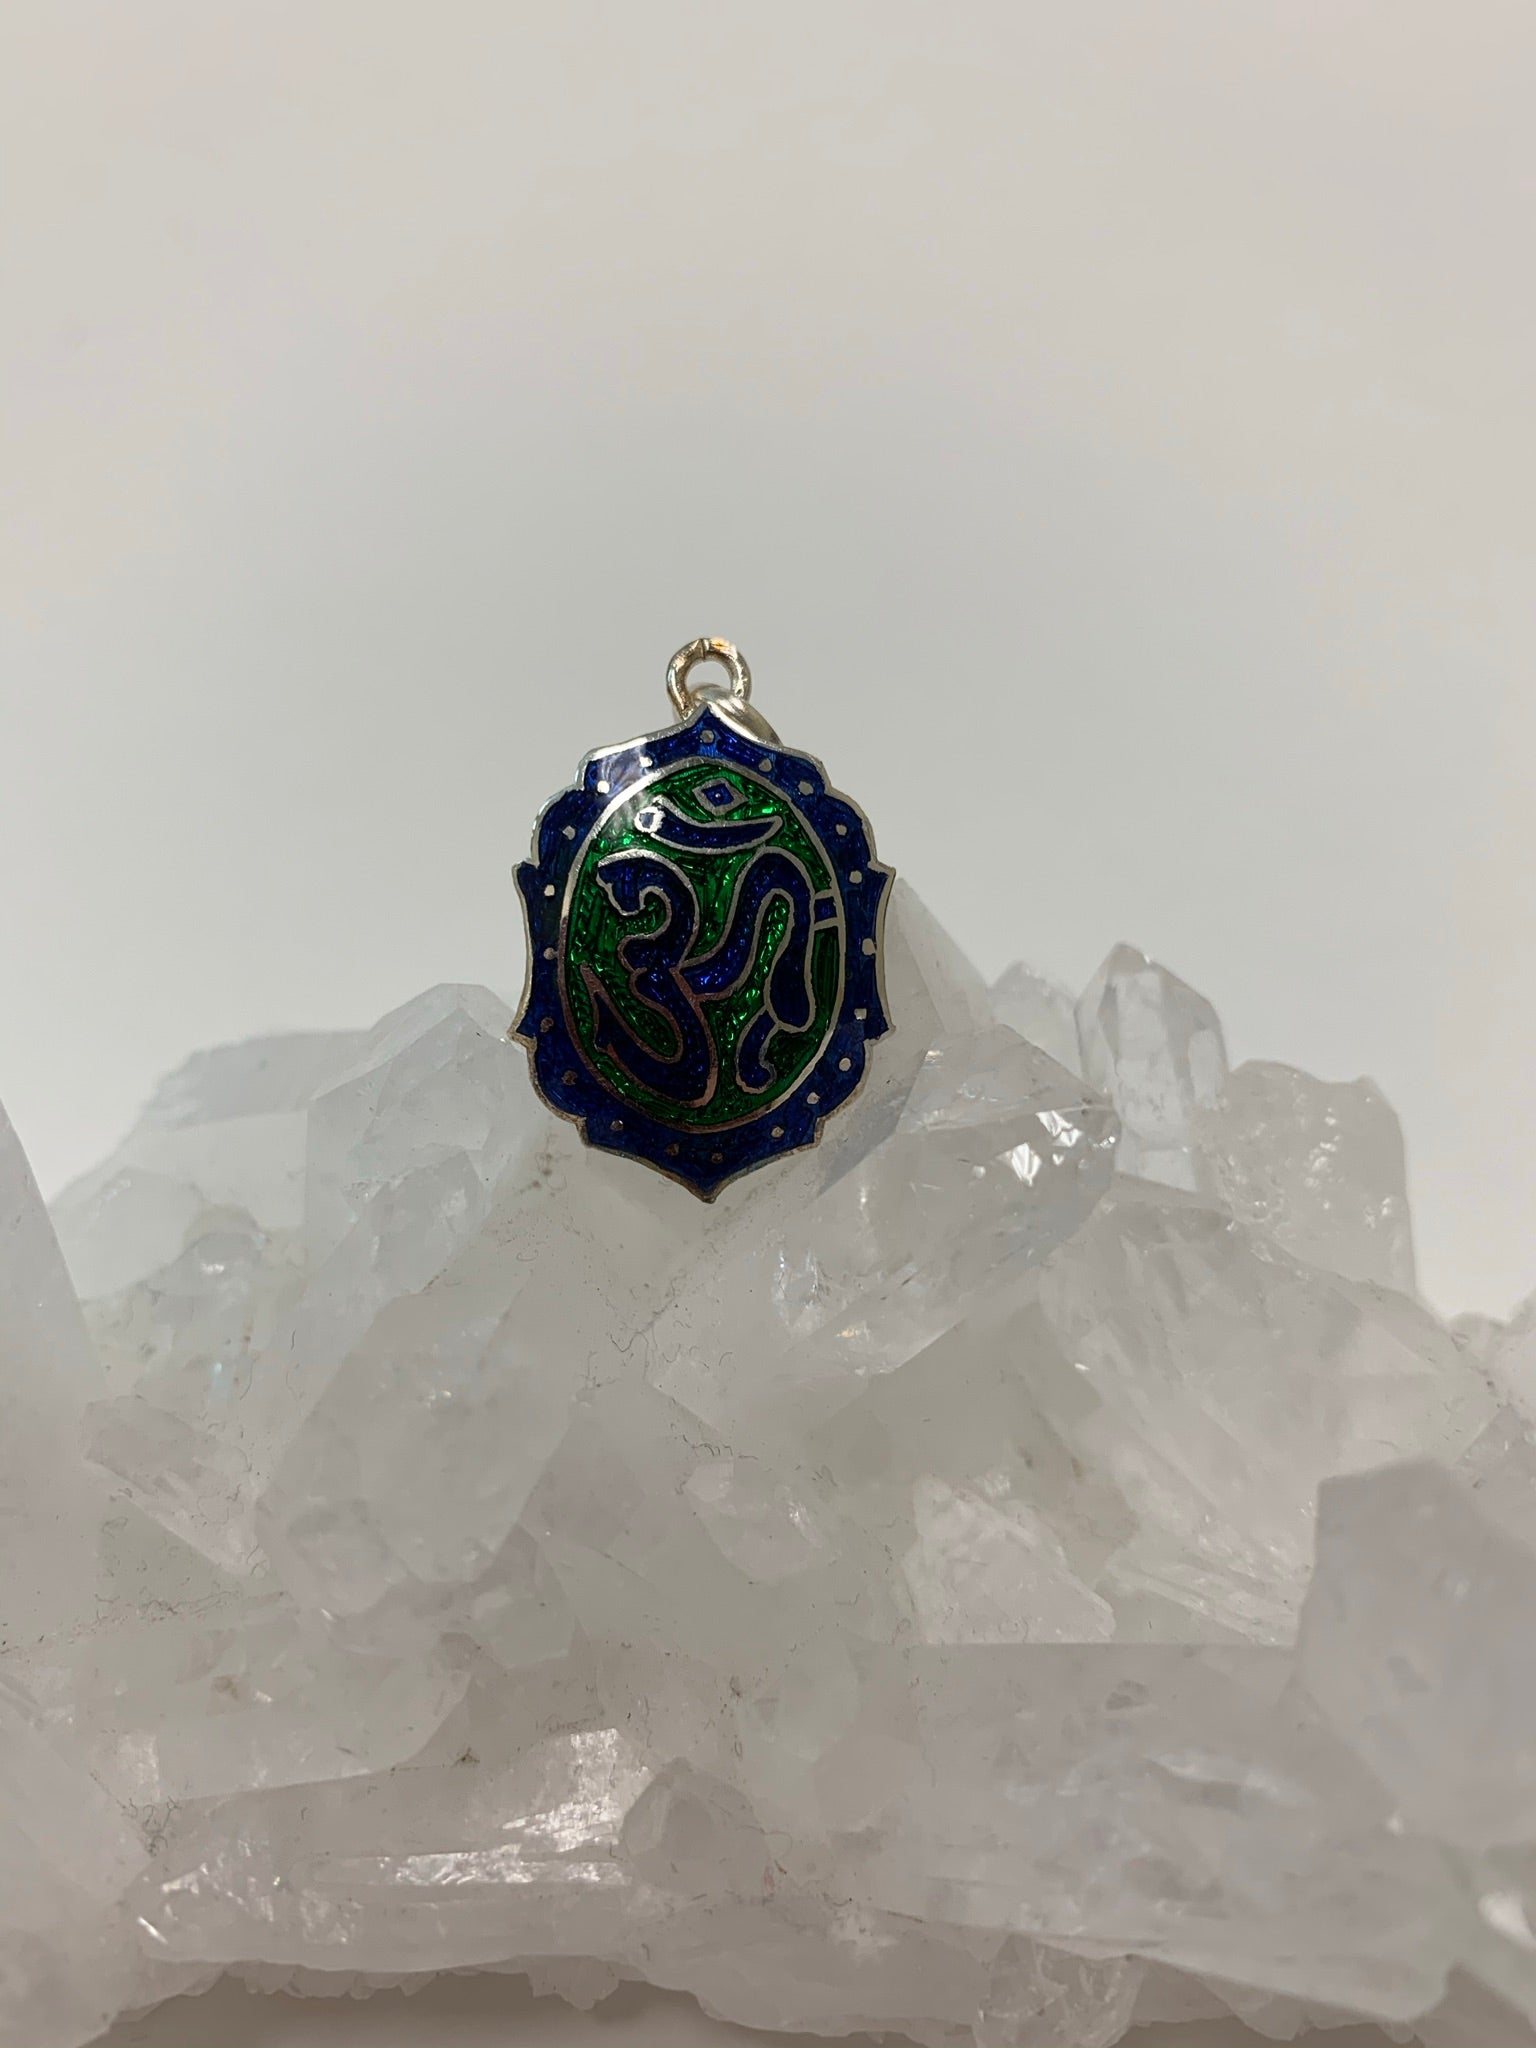 An additional view of the Om enamel pendant. It is oval-ish with the Om symbol in blue set within a green oval background. The Om oval is surrounded by a stylized oval-ish shape that is the same color blue as the om symbol. Around that edge. within the blue color, are tiny silver circles. The whole enamel pendant is set on sterling silver and has a sterling silver bail. This is a pendant only - no necklace chain included. It is approximately 1¼" long.